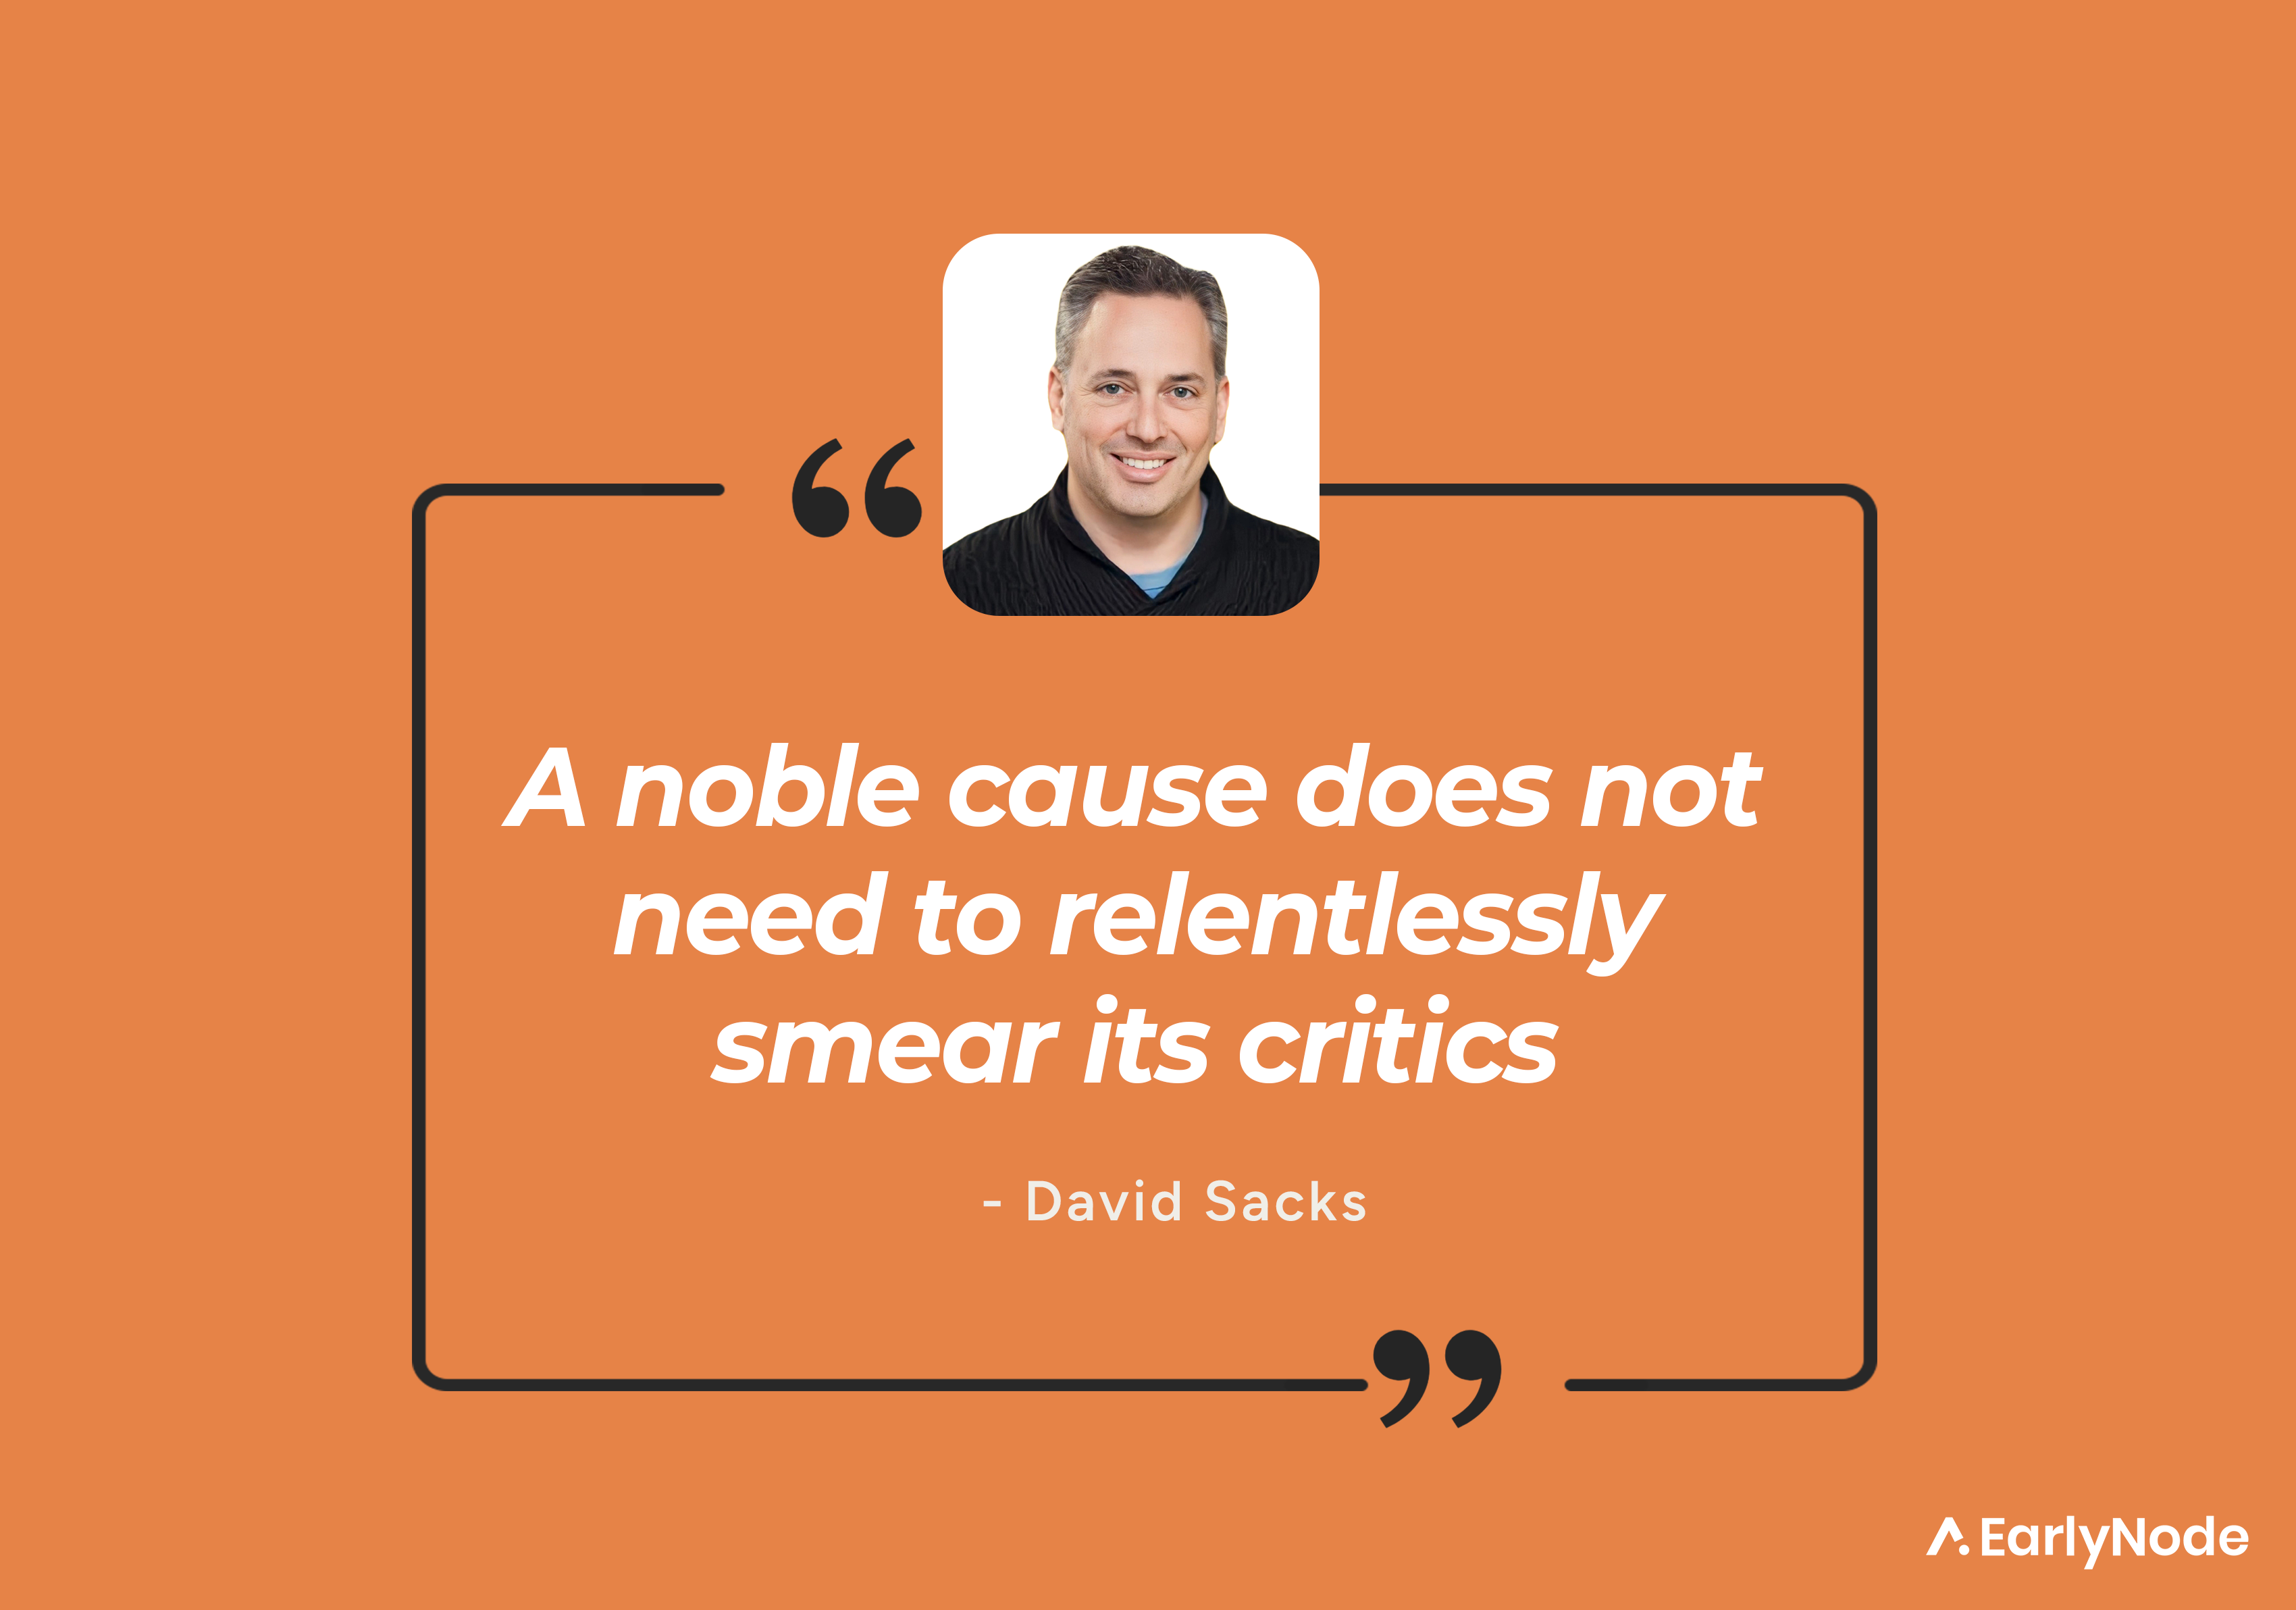 Top 10 Quotes by David Sacks